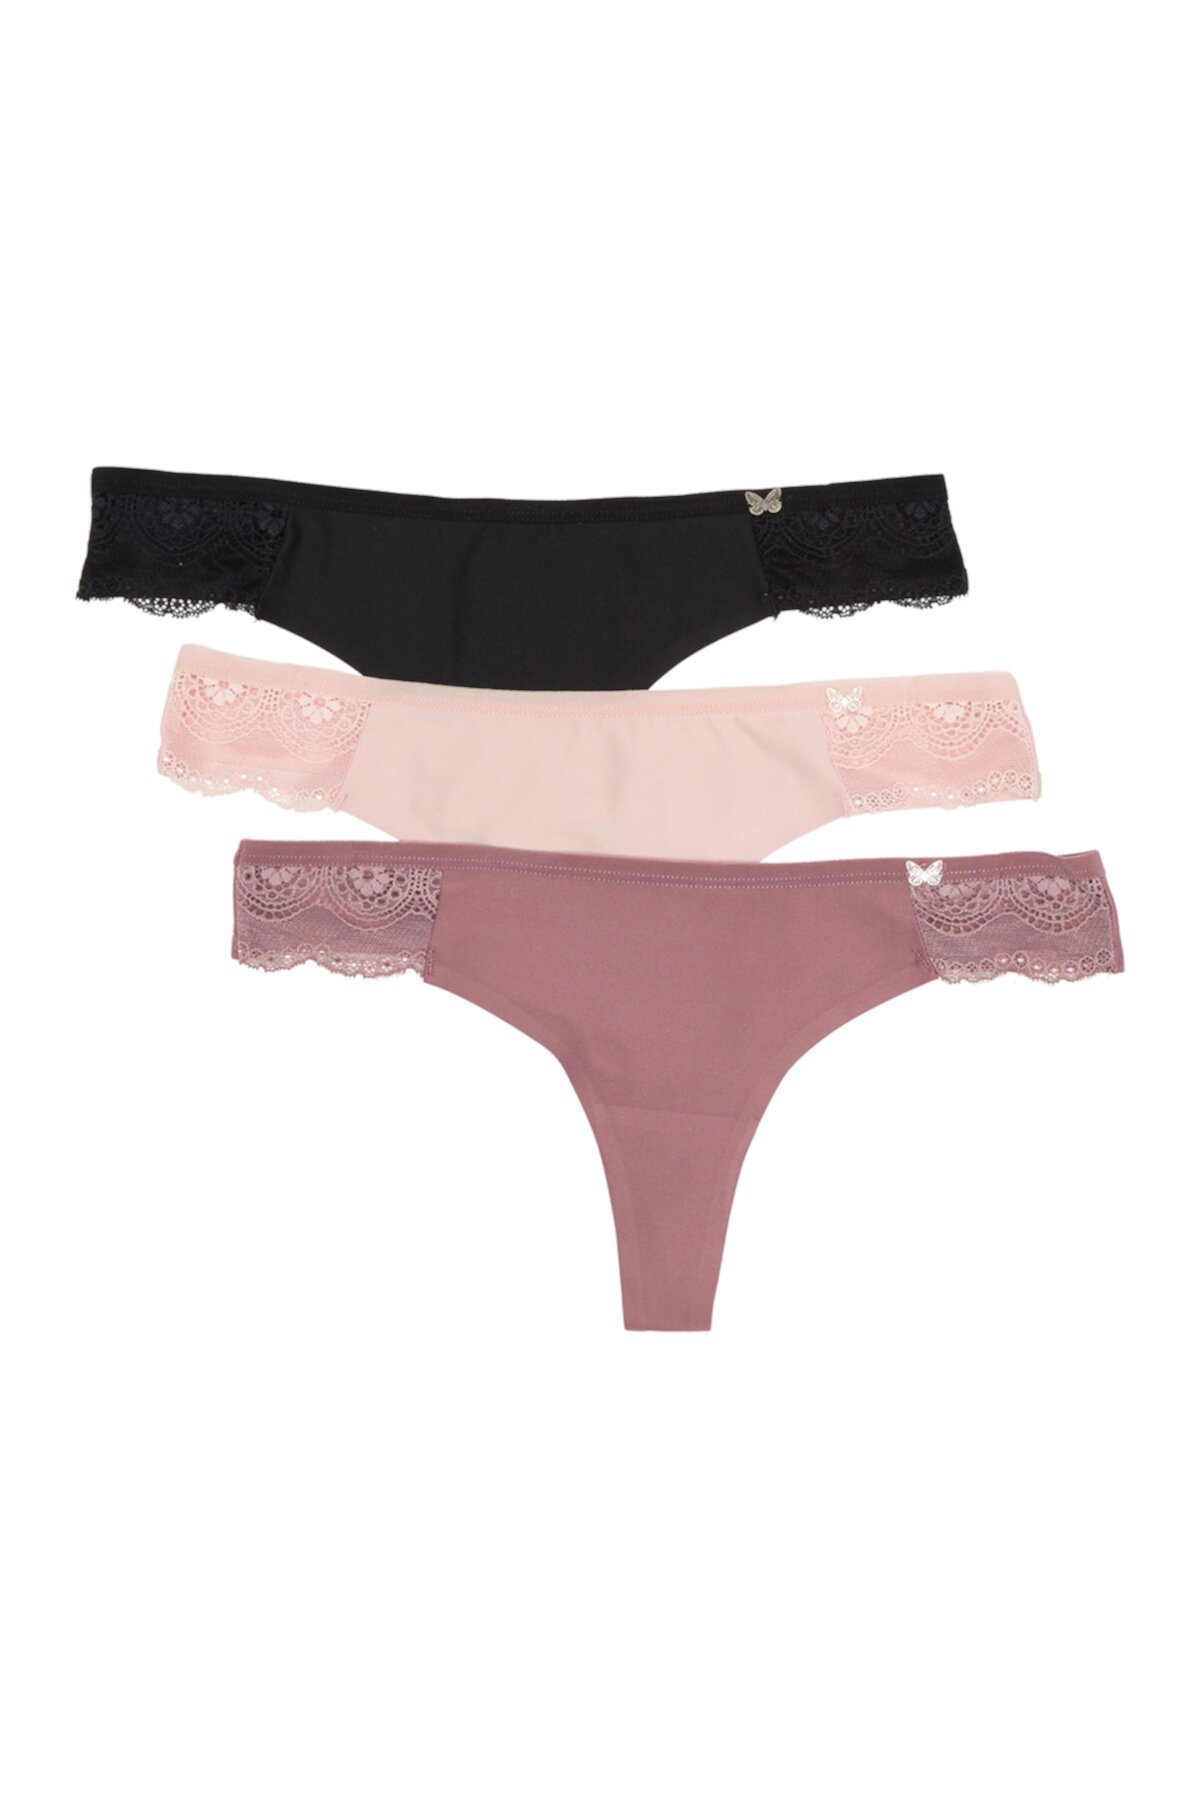 Lace Trim Thong - Pack of 3 Jessica Simpson